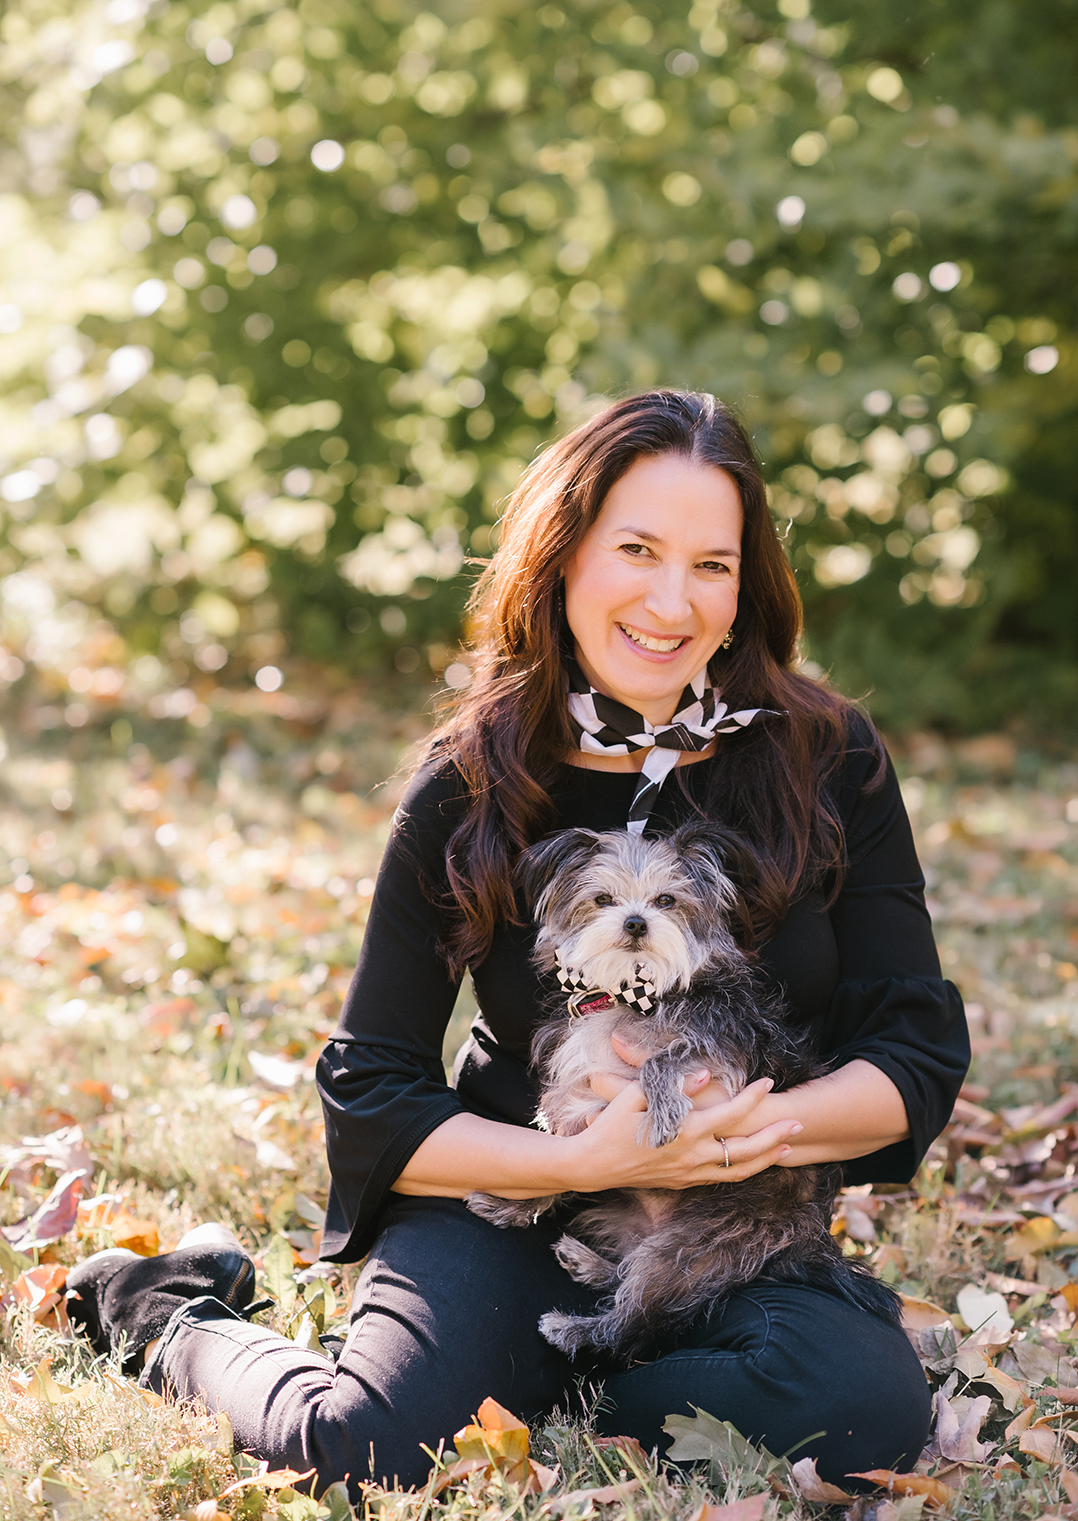 Carmel author, rescue dog featured in latest ‘Chicken Soup’ release